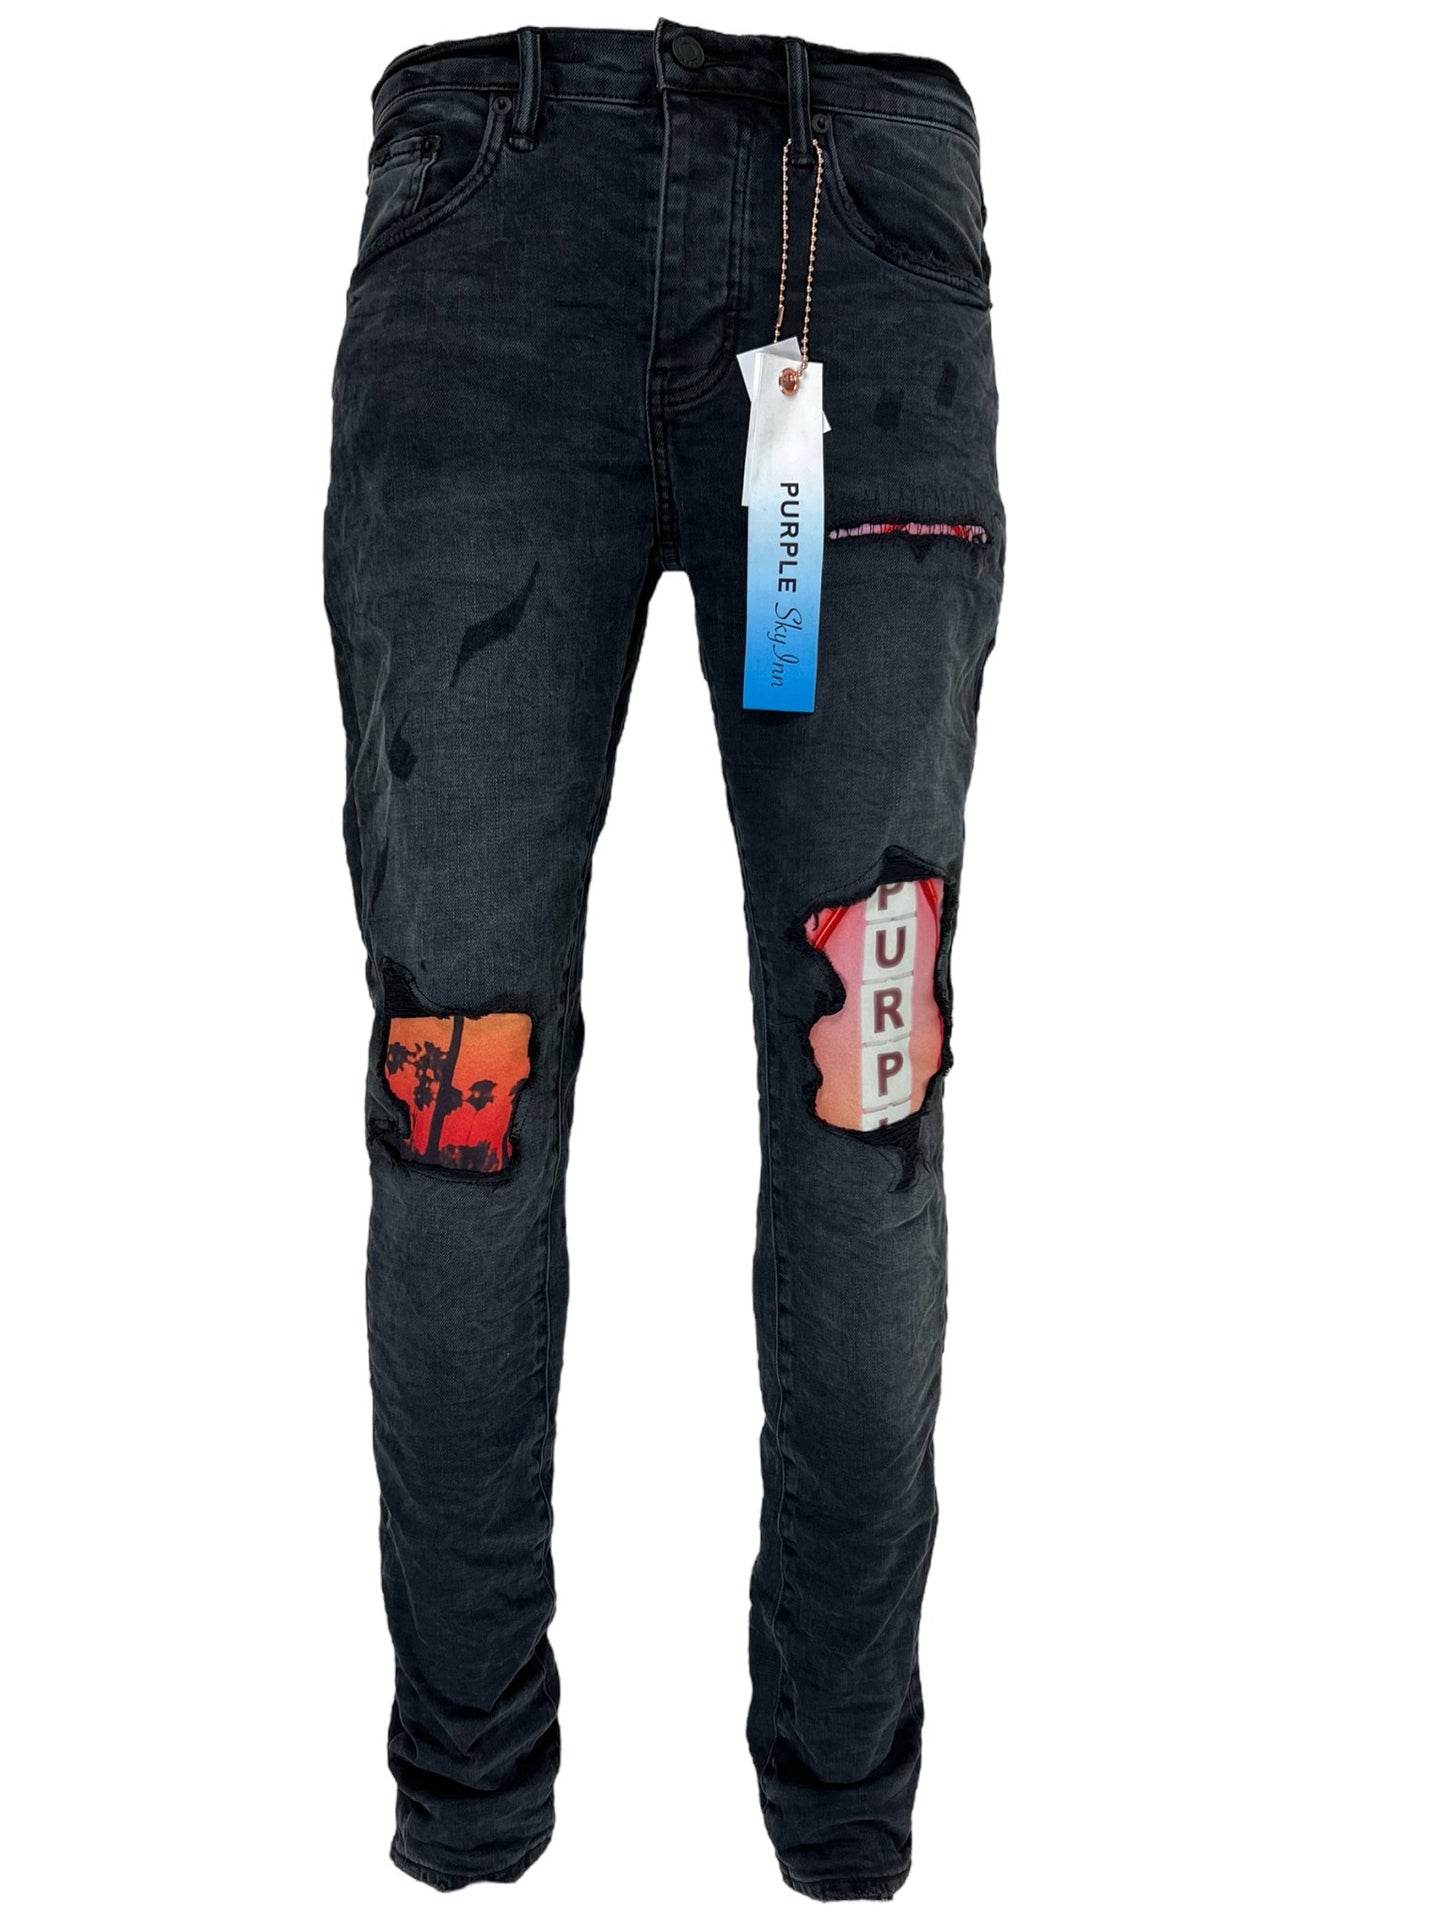 A pair of PURPLE BRAND men's skinny jeans with patches on them.